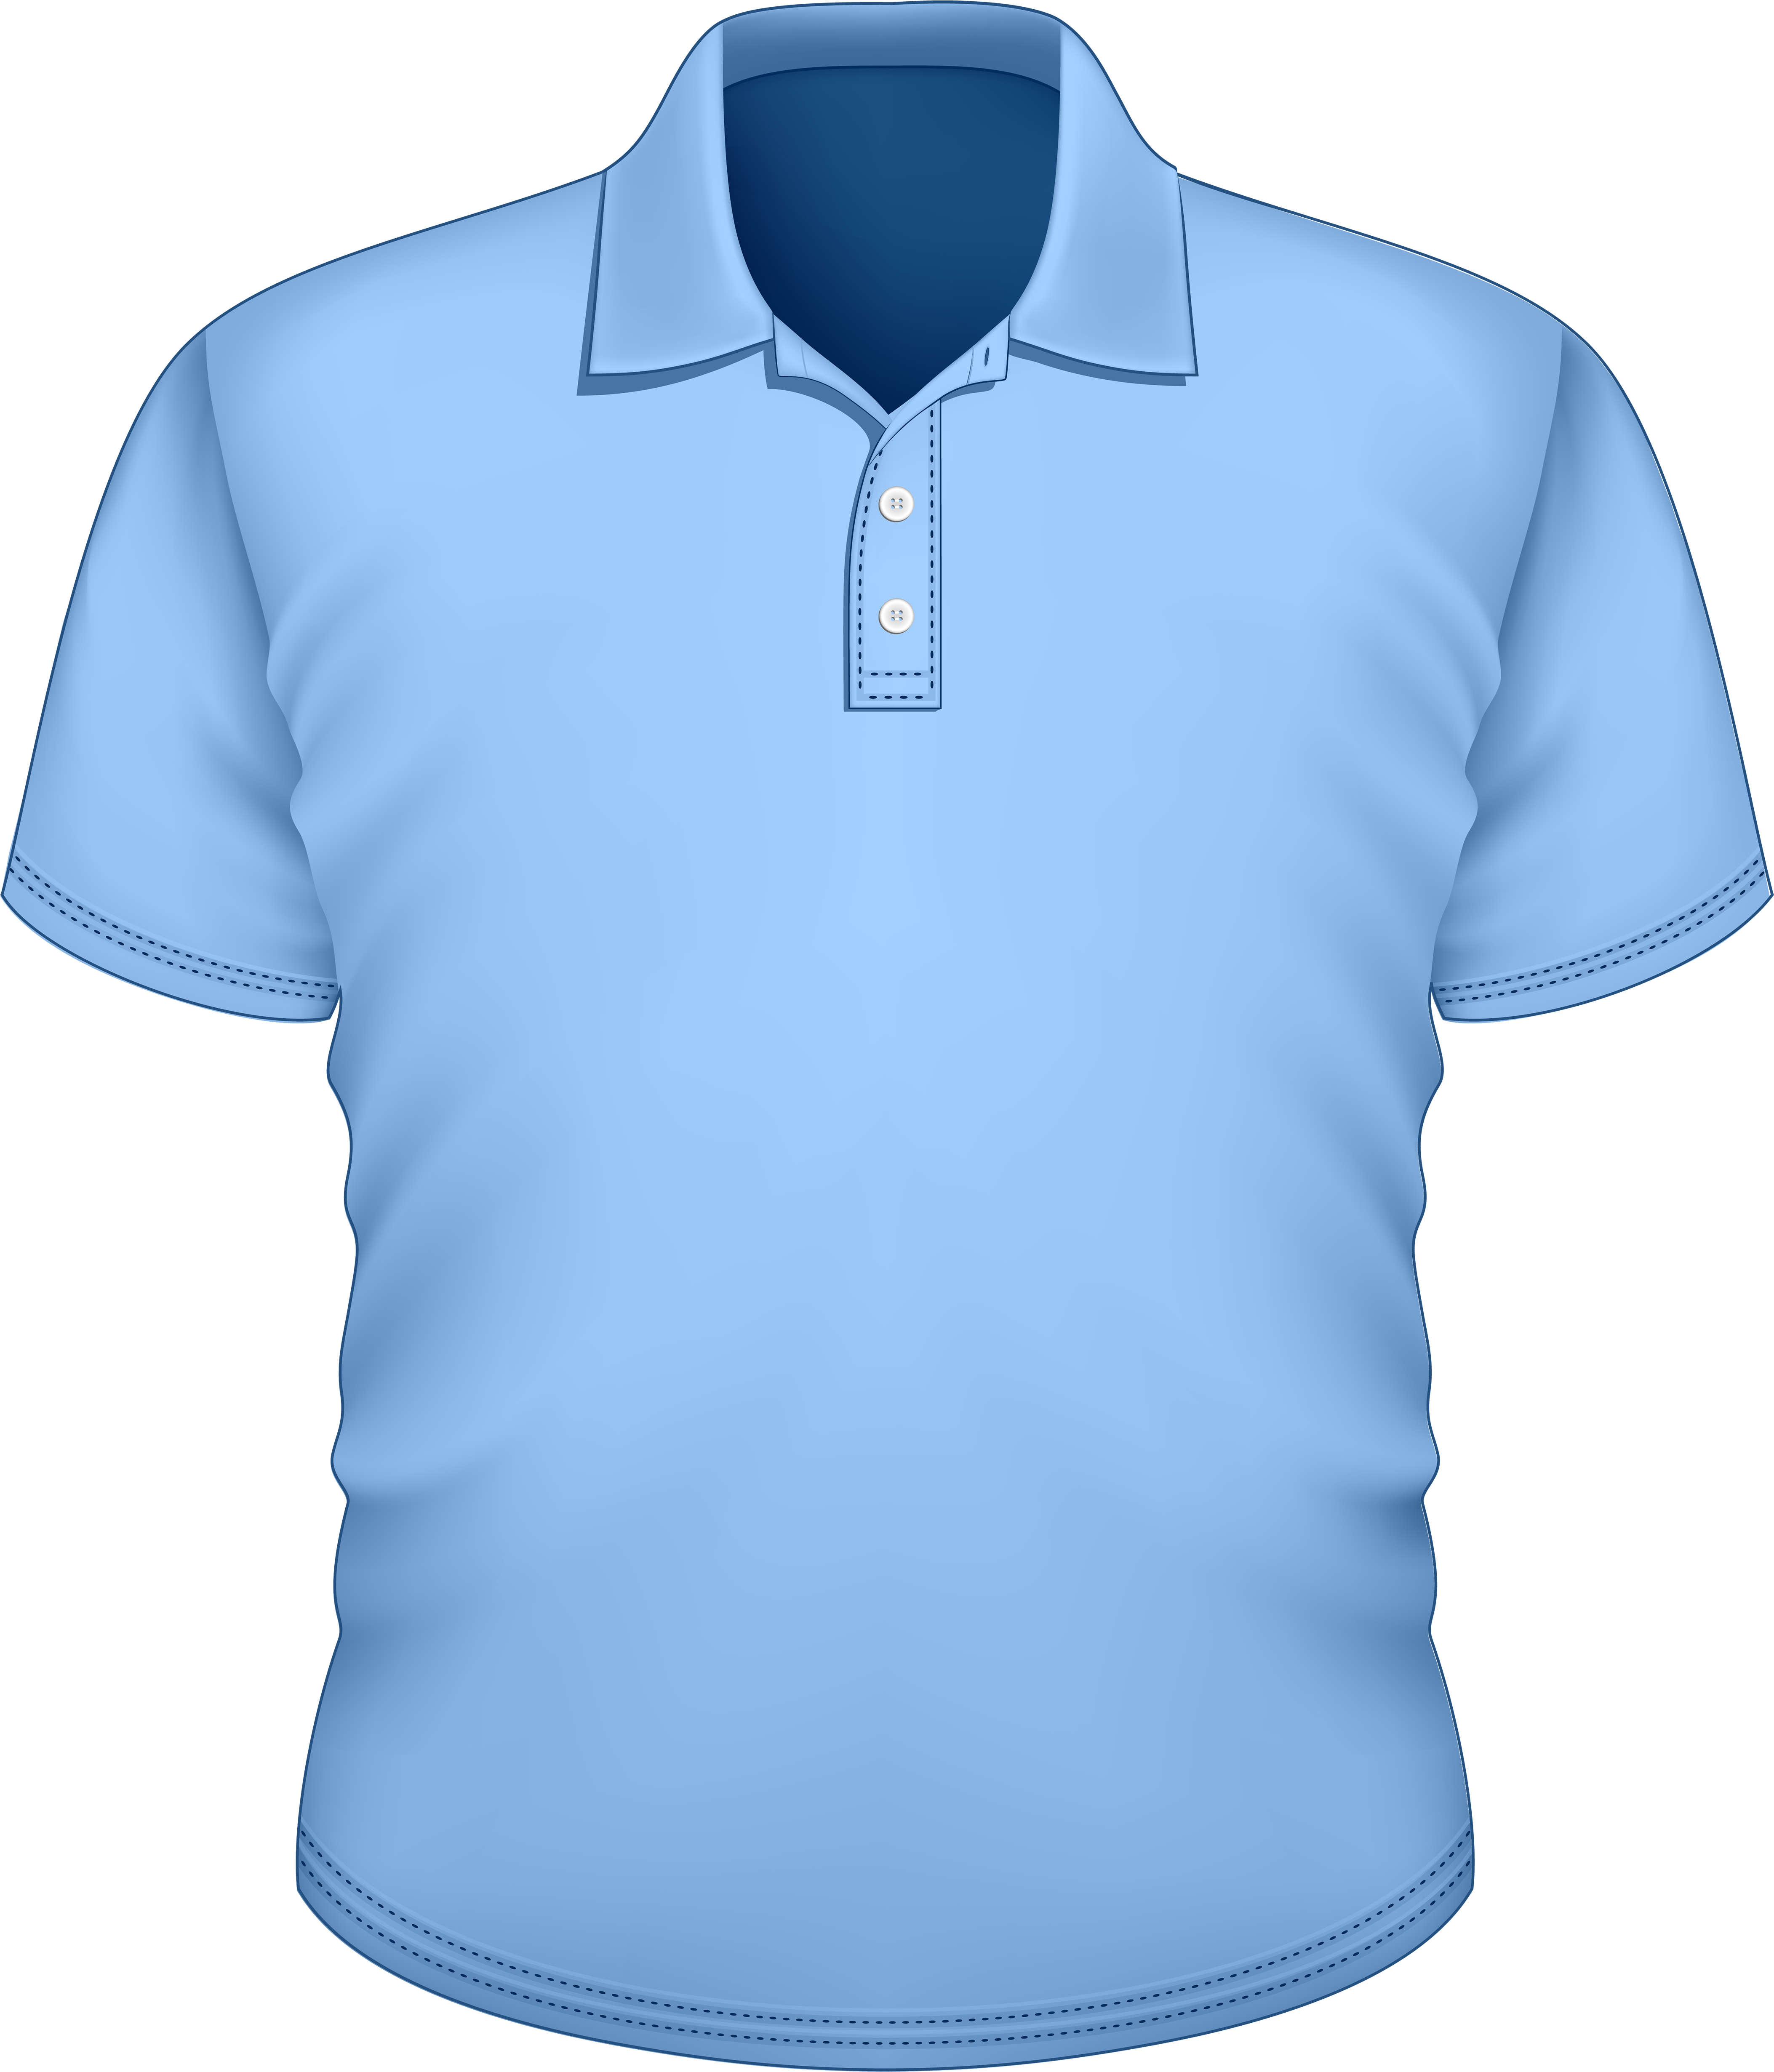 A Blue Polo Shirt With A Black Background